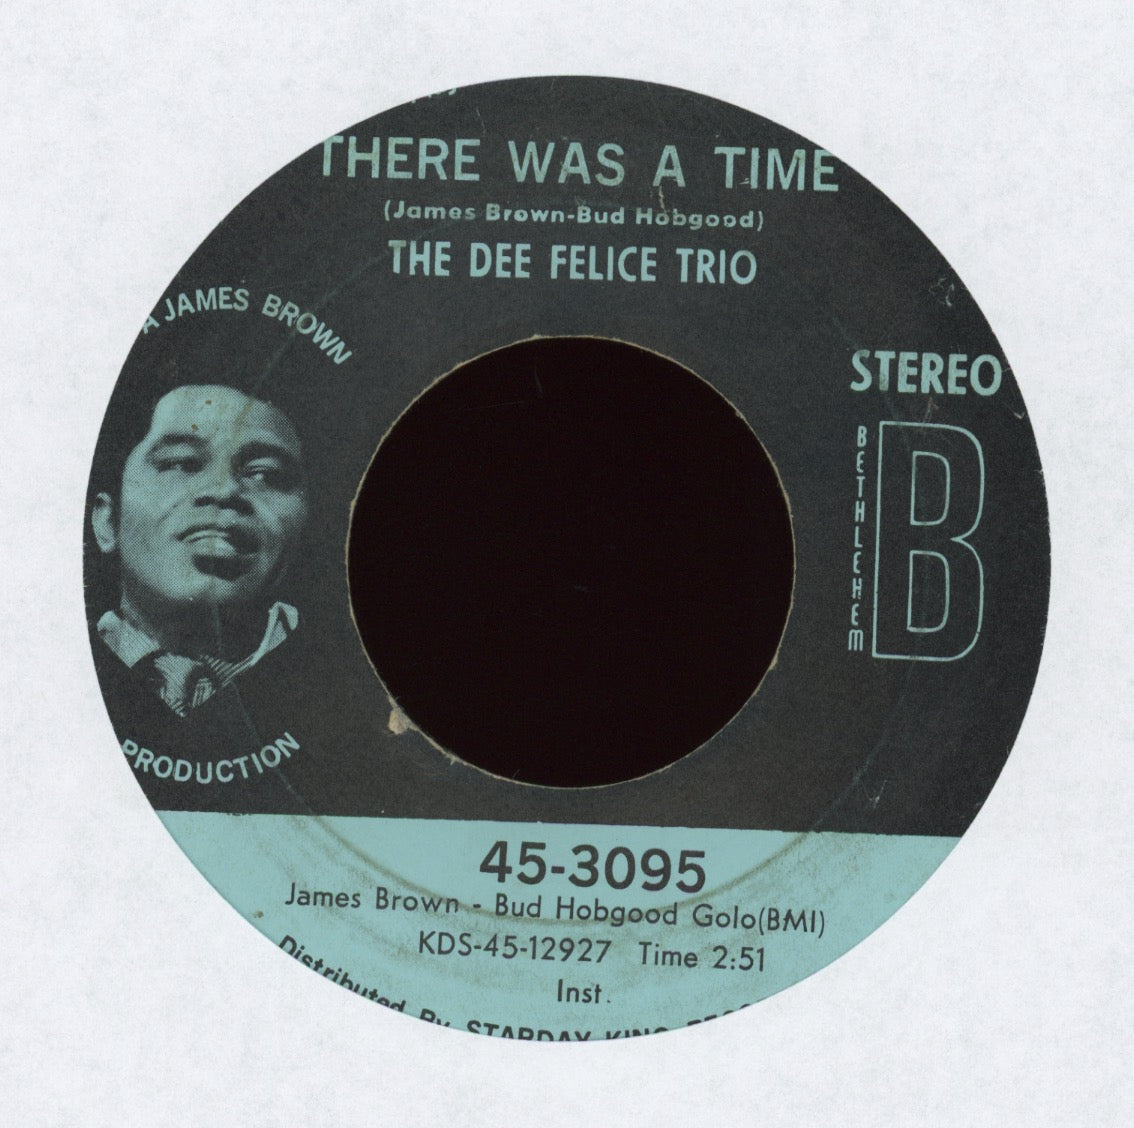 Dee Felice Trio - There Was A Time on Bethlehem